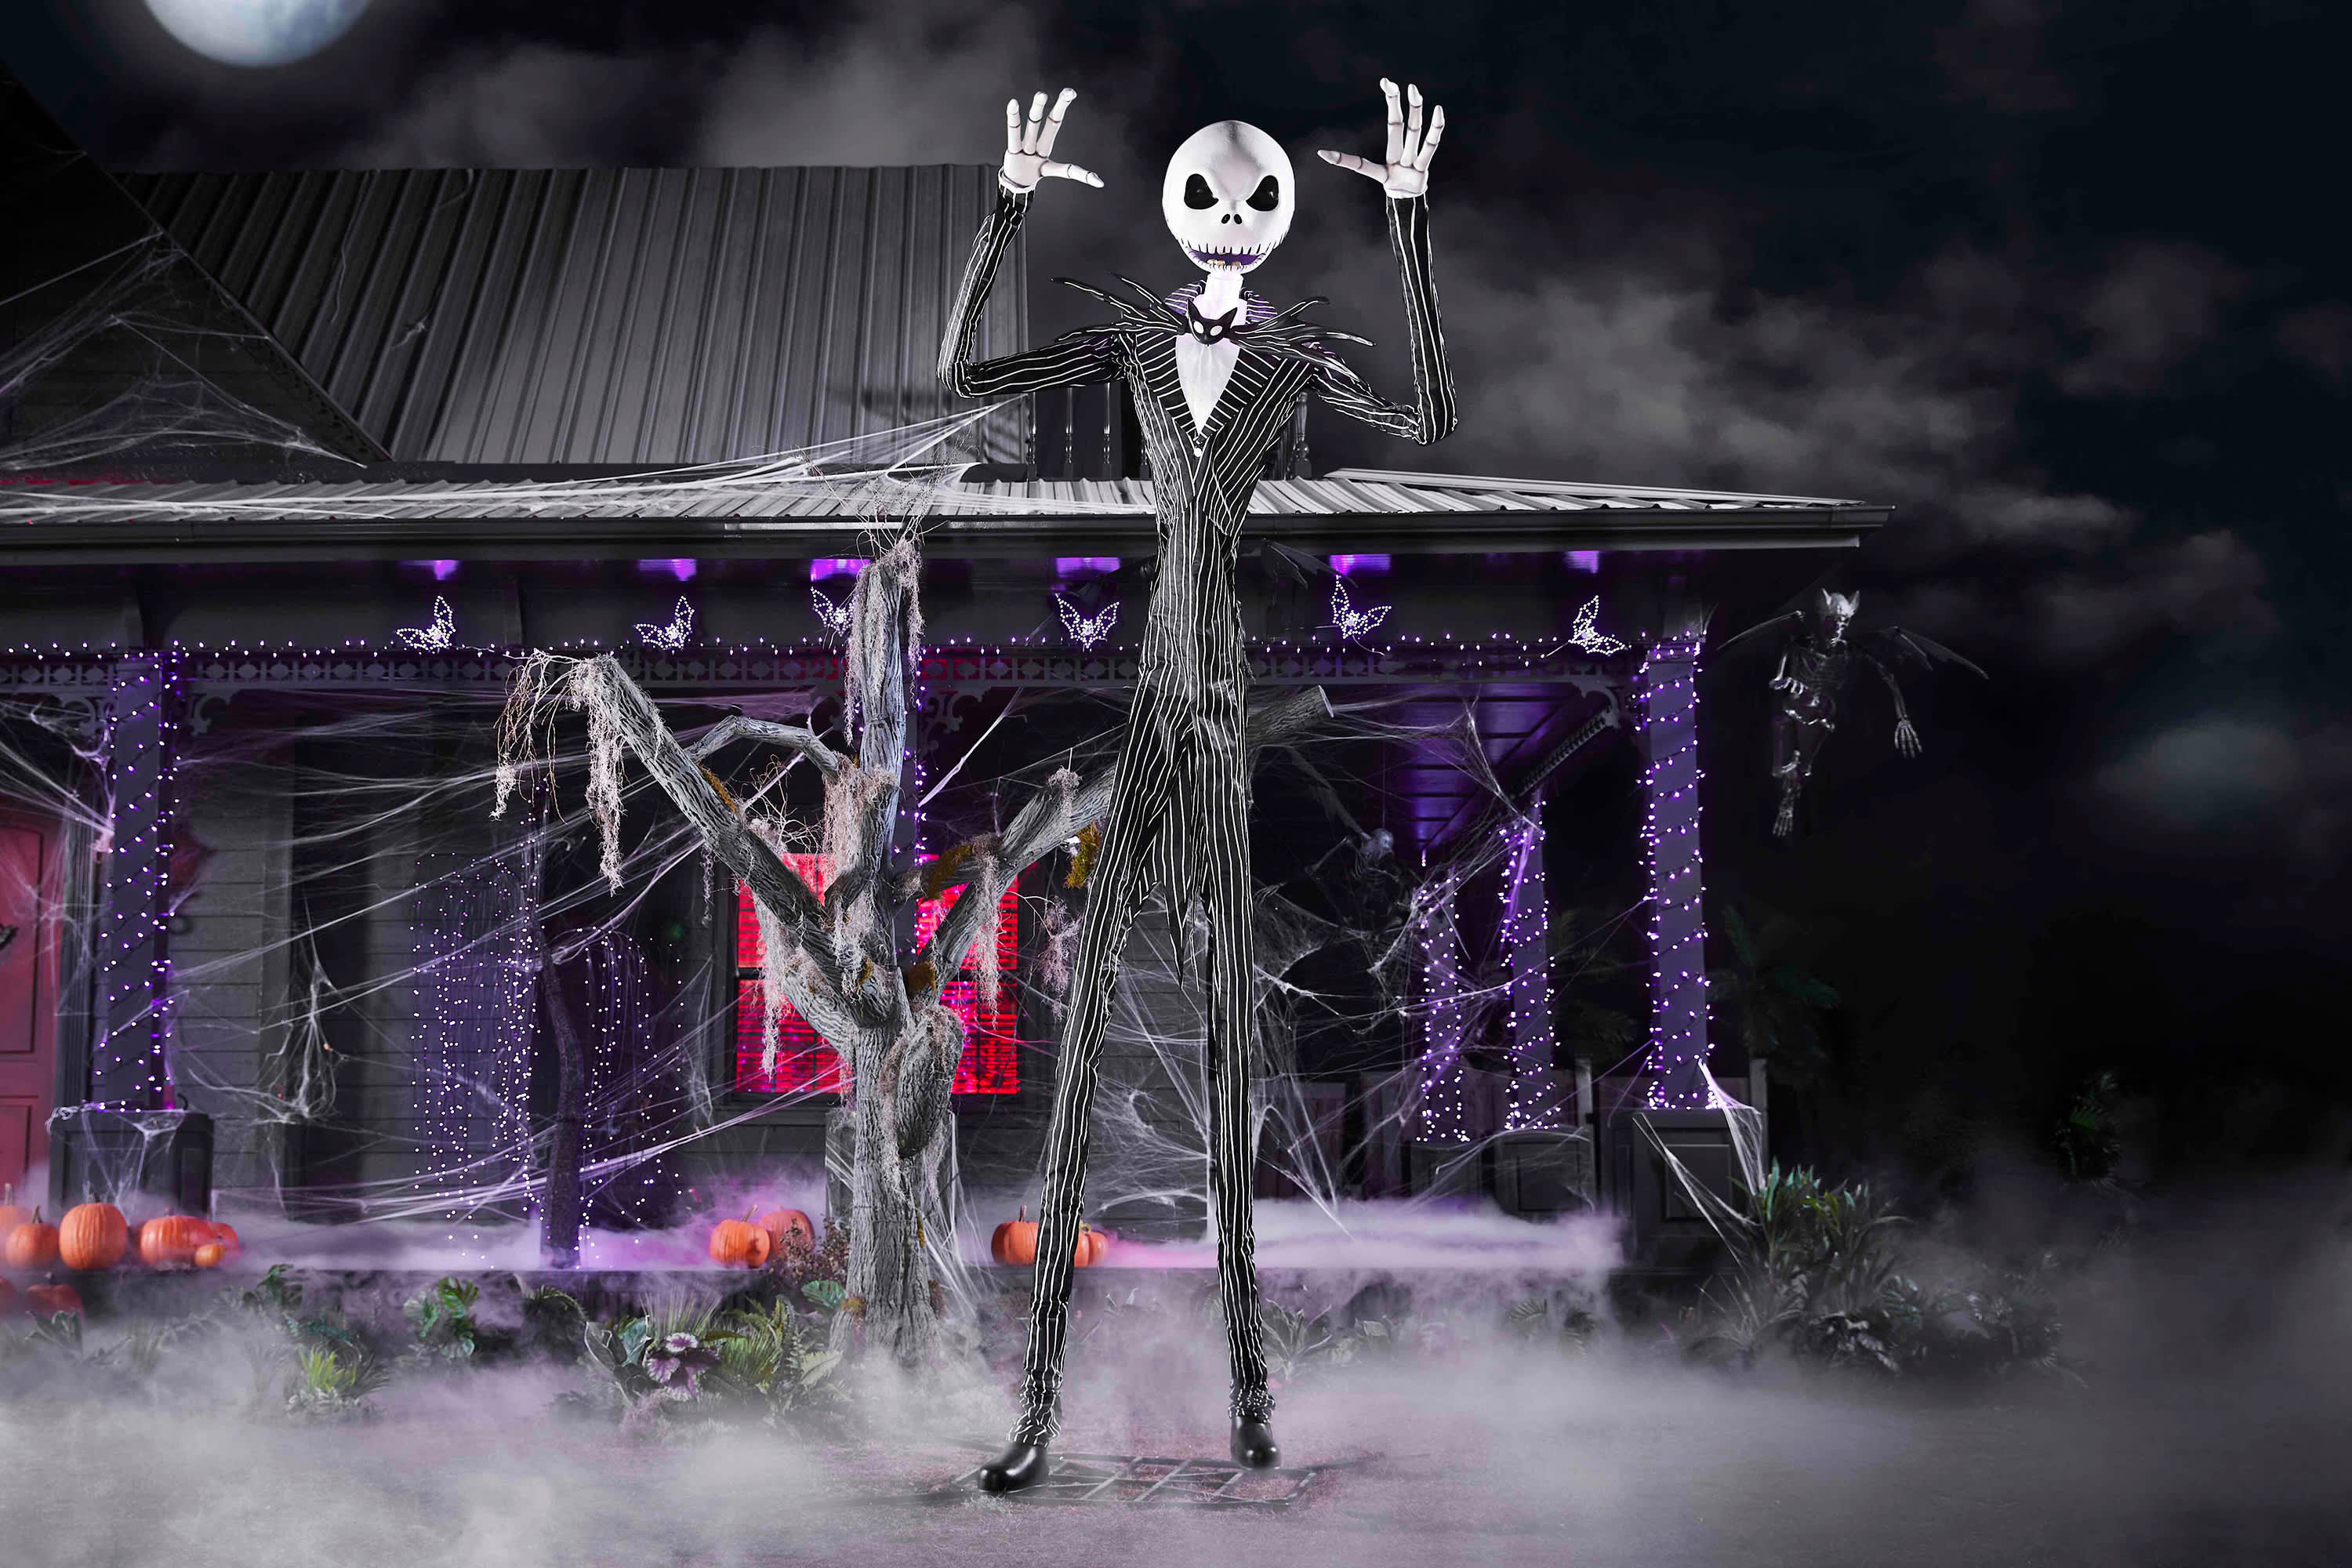 The Home Depot Is Selling a 13-Foot Jack Skellington Halloween Piece